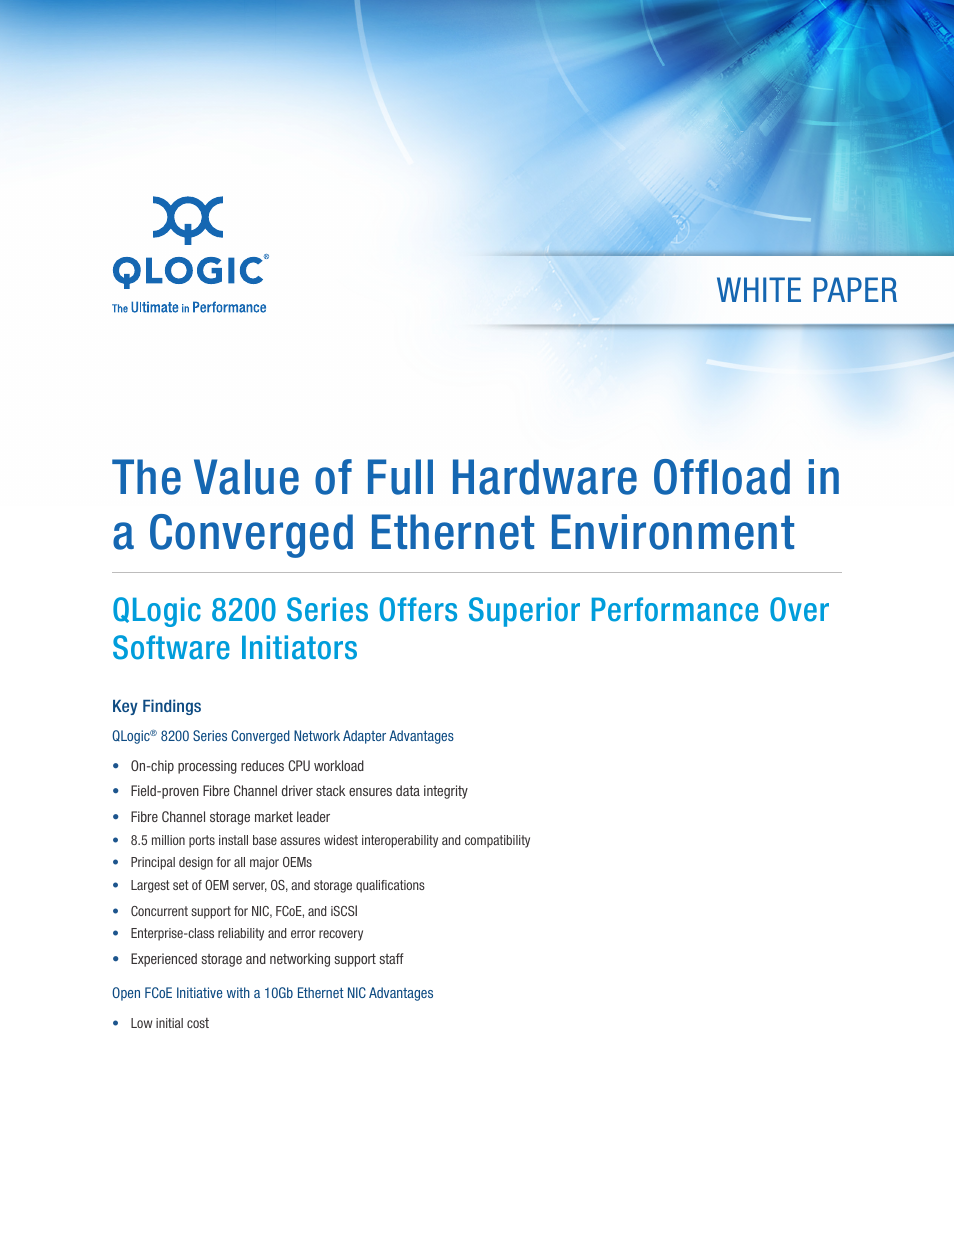 8200 Series The Value of Full Hardware Offload in a Converged Ethernet Environment